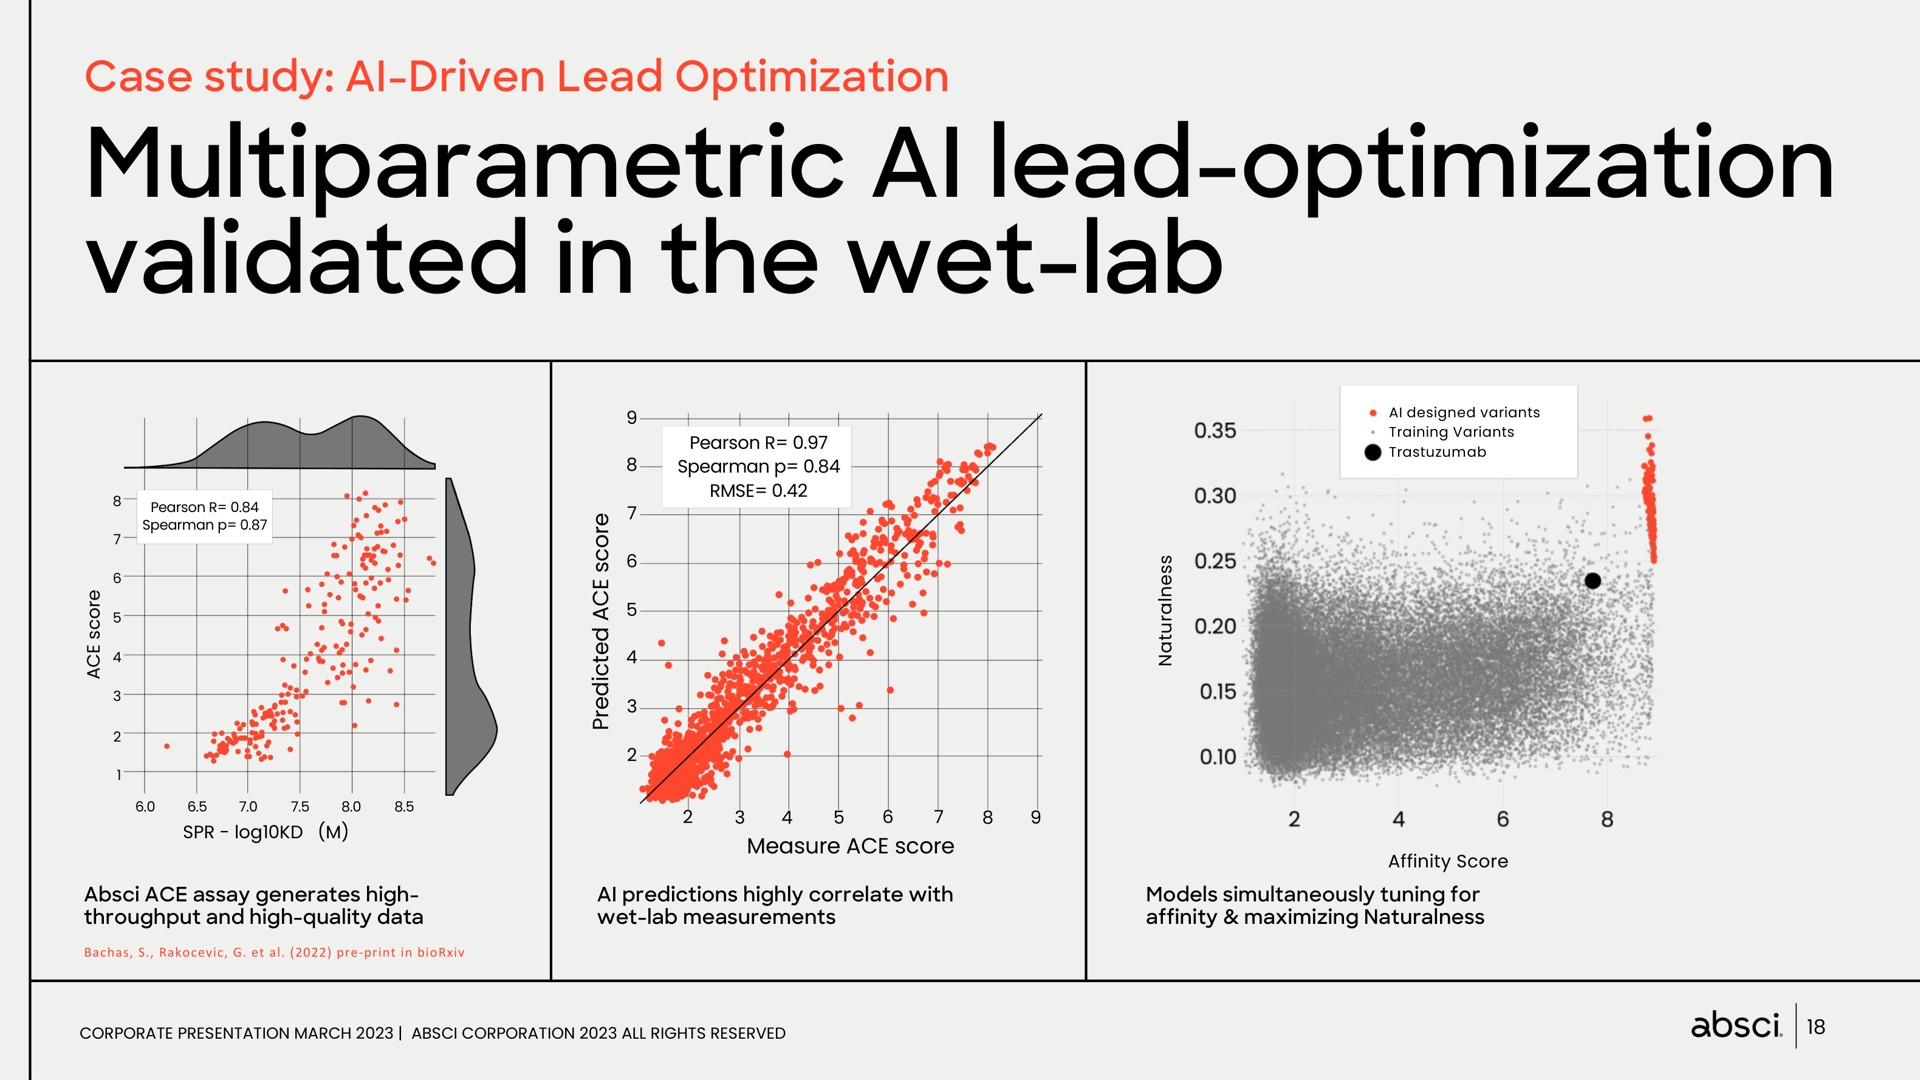 lead optimization validated in the wet lab | Absci